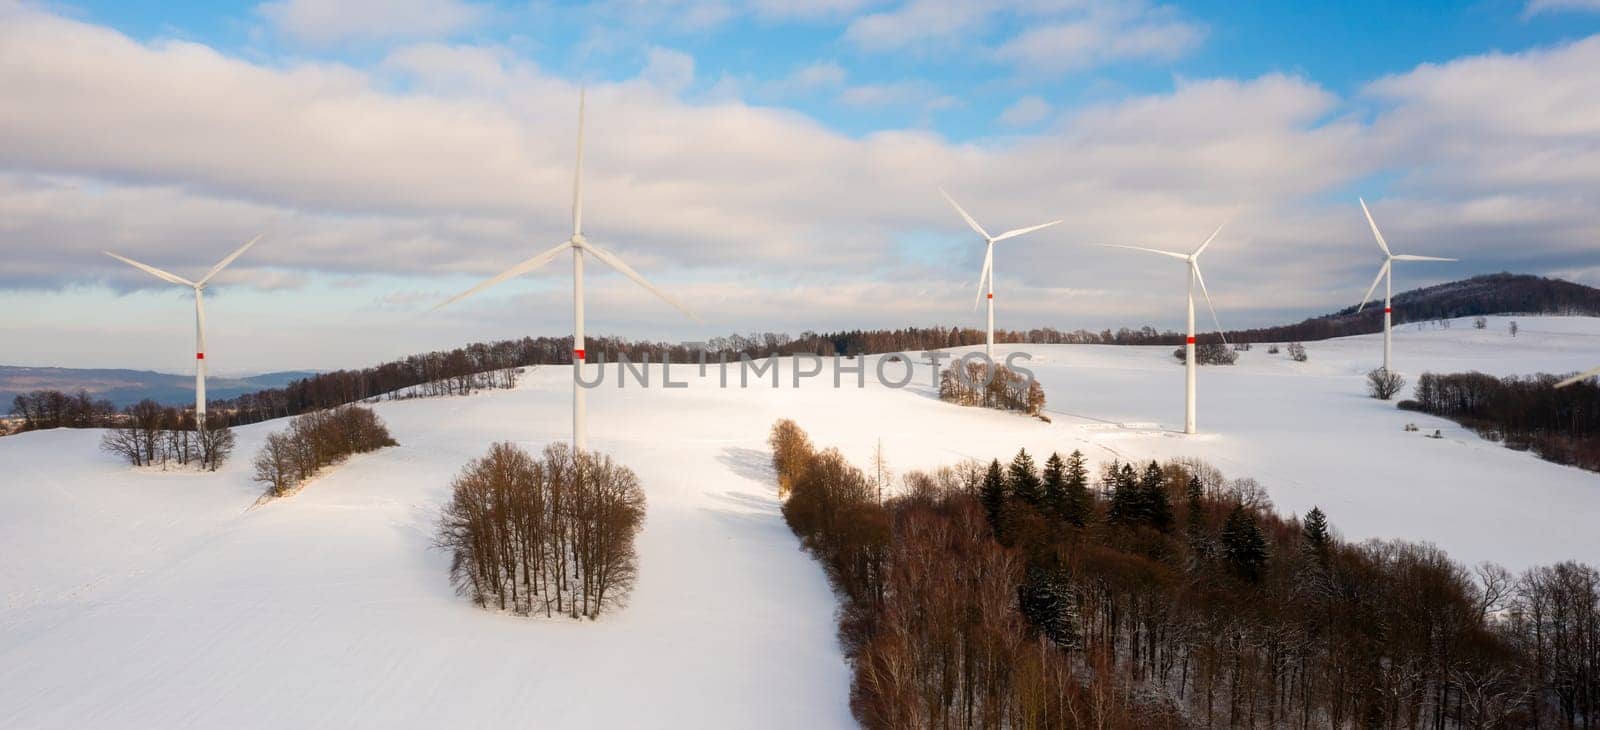 Banner of wind farm or wind park, with high wind turbines for generation electricity by vladimka